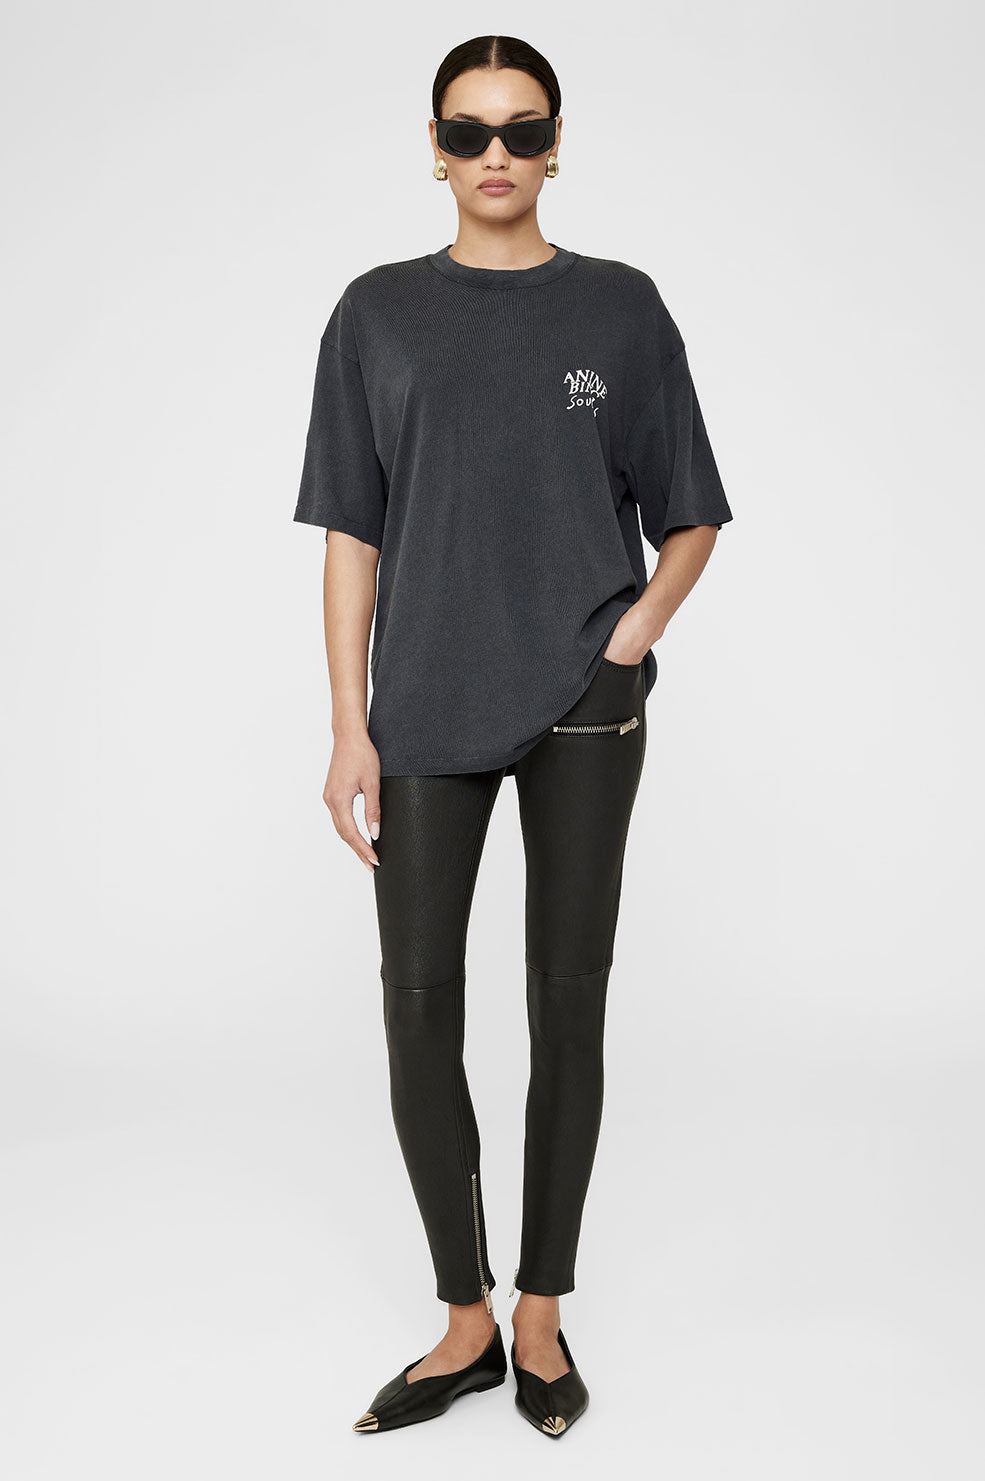 ANINE BING Kent Tee Sounds - Washed Black - On Model Front